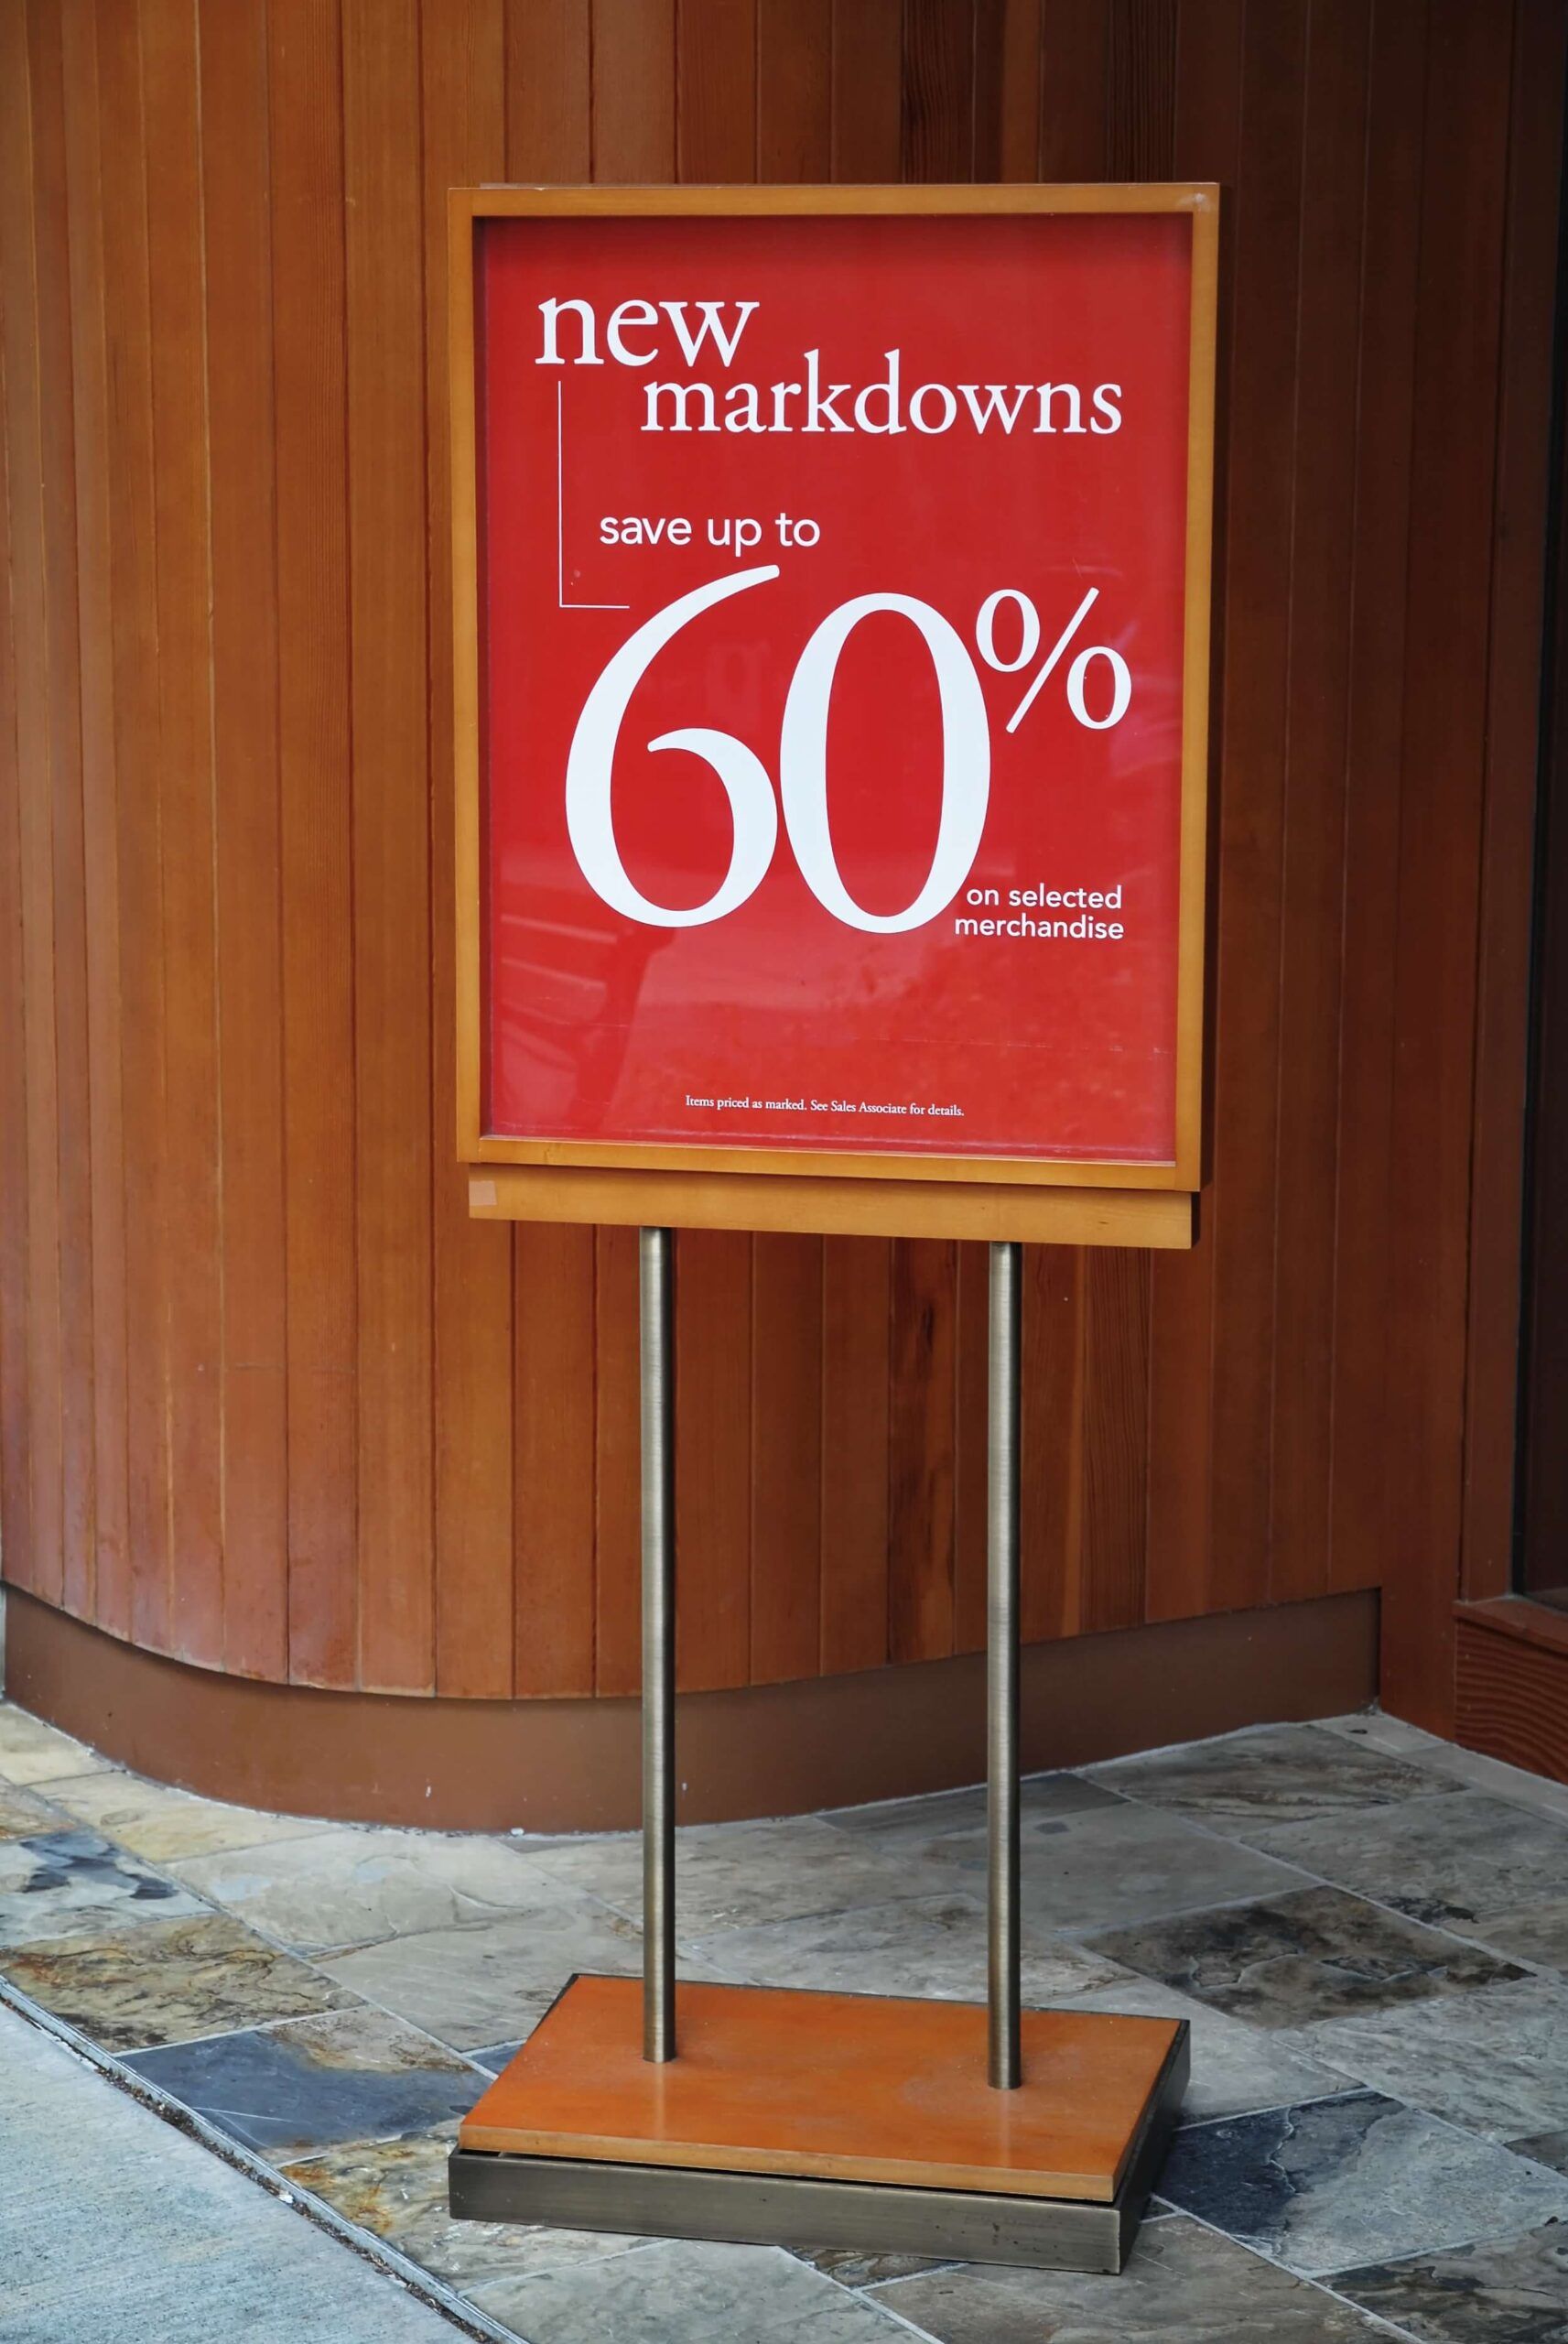 ed promotional signboard standing outside a store announcing new markdowns of up to 60% on selected merchandise.